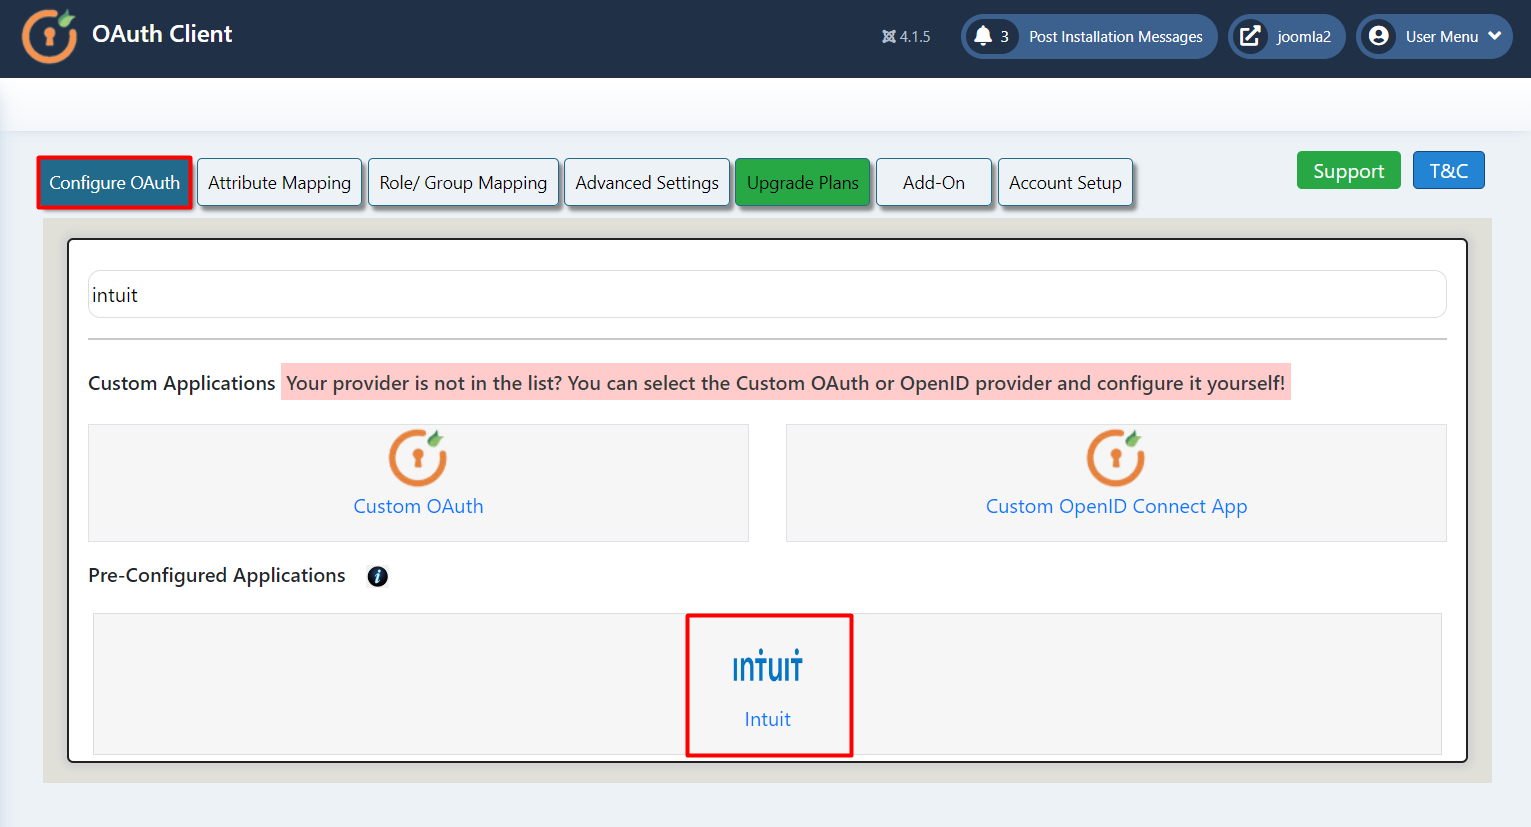 Intuit Single Sign-On (SSO) OAuth/OpenID